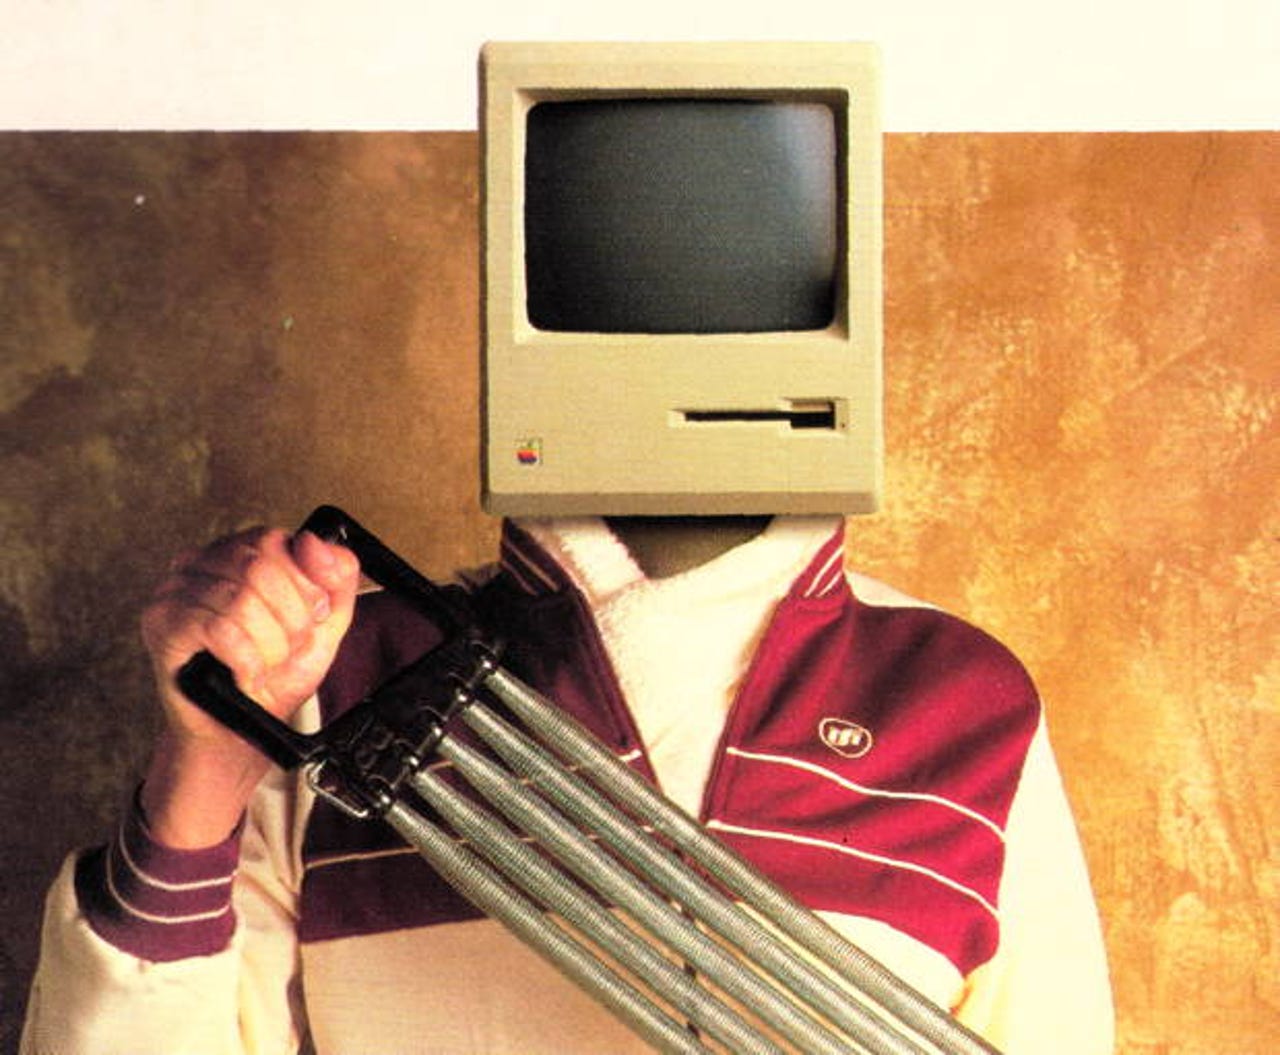 Reflections on the 30th Anniversary of the Macintosh by a true believer